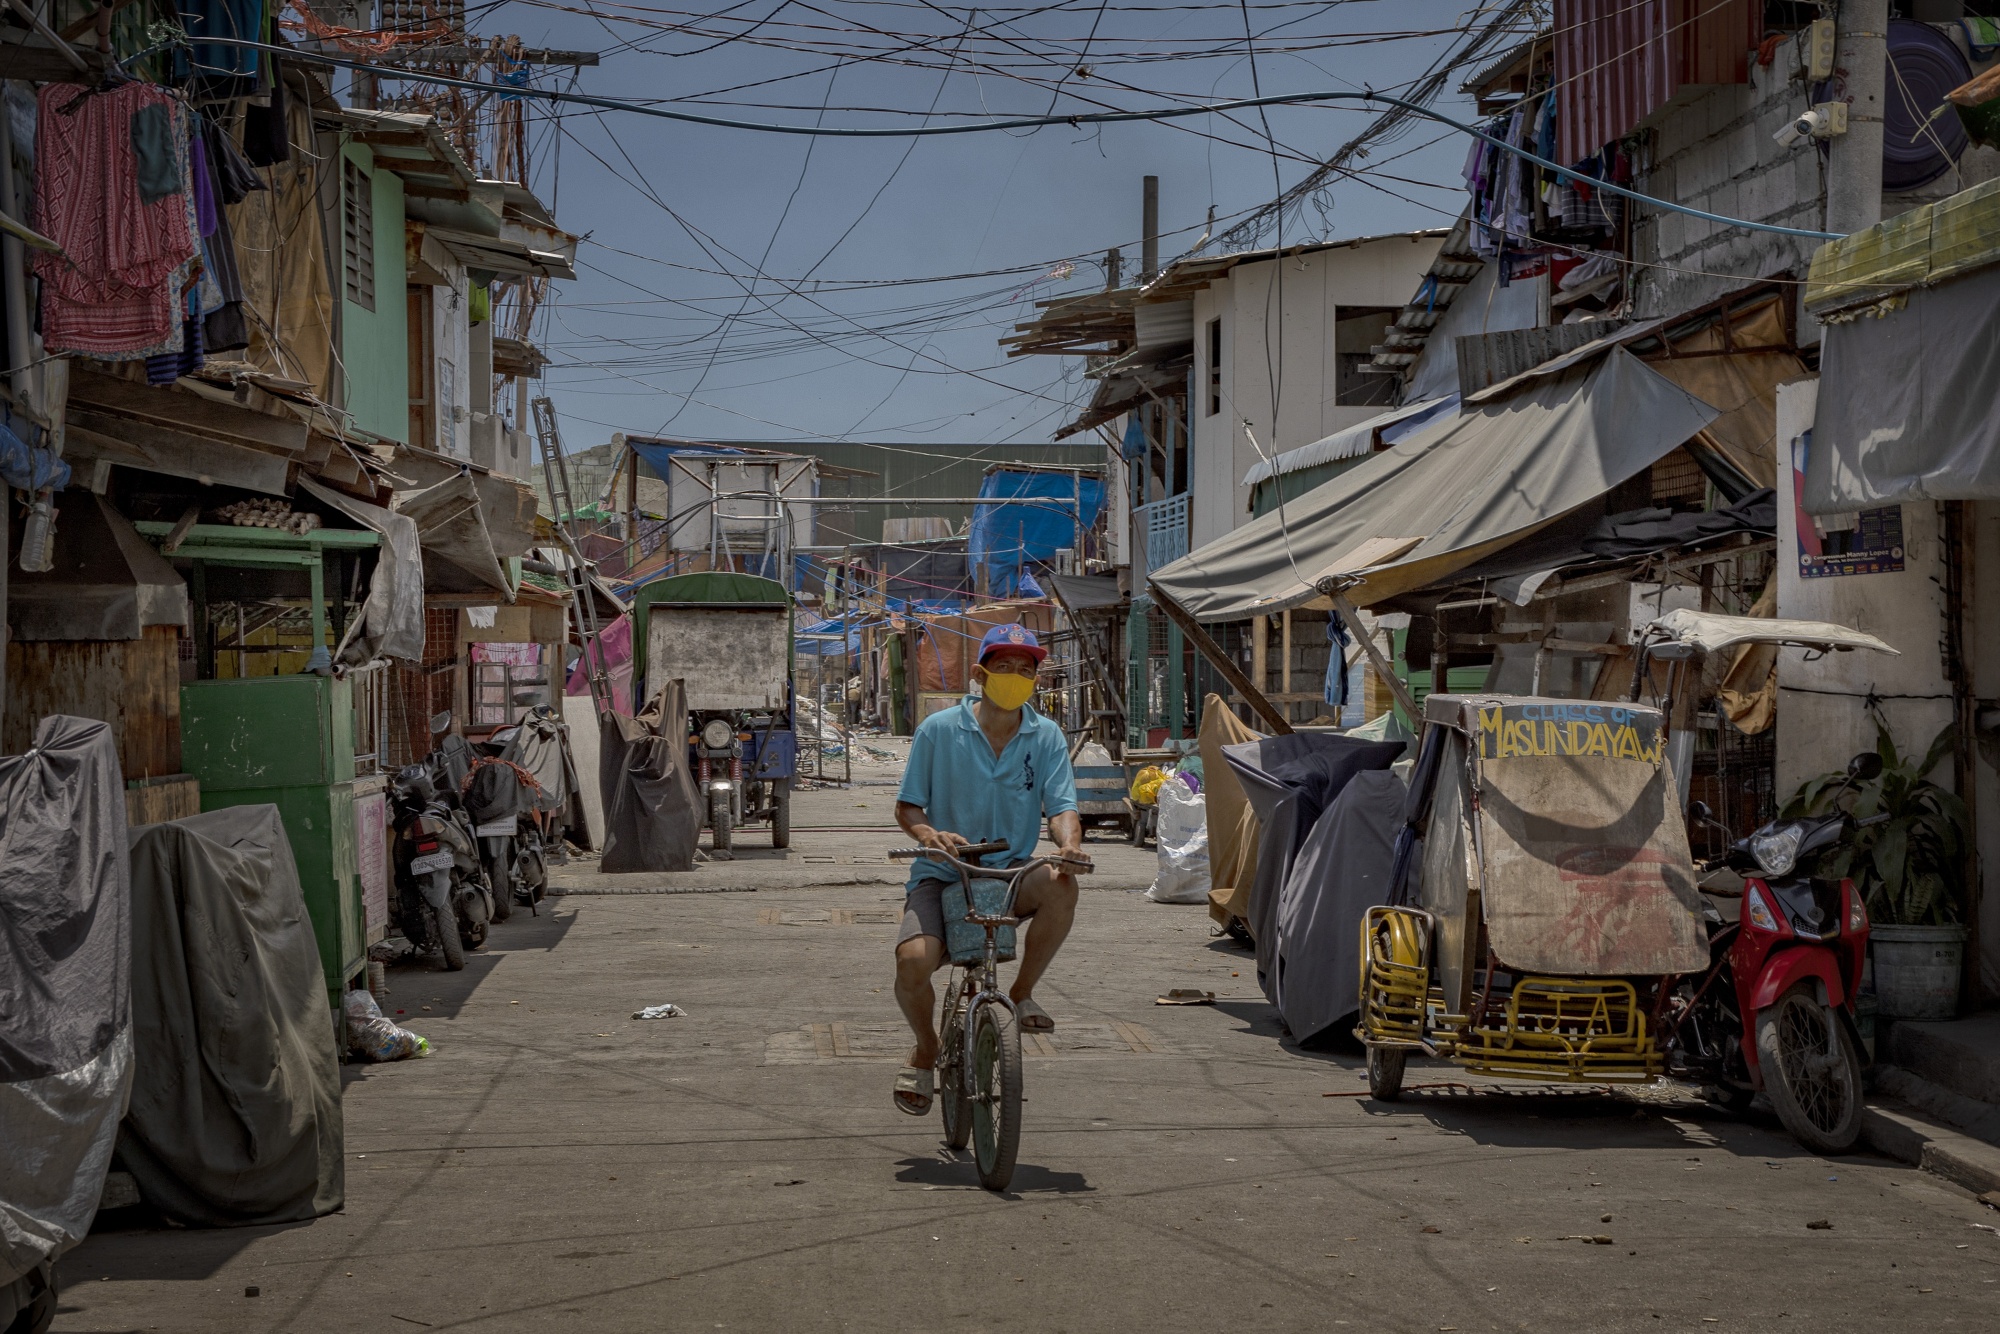 A man riding a bicycle in a street in the Philippines